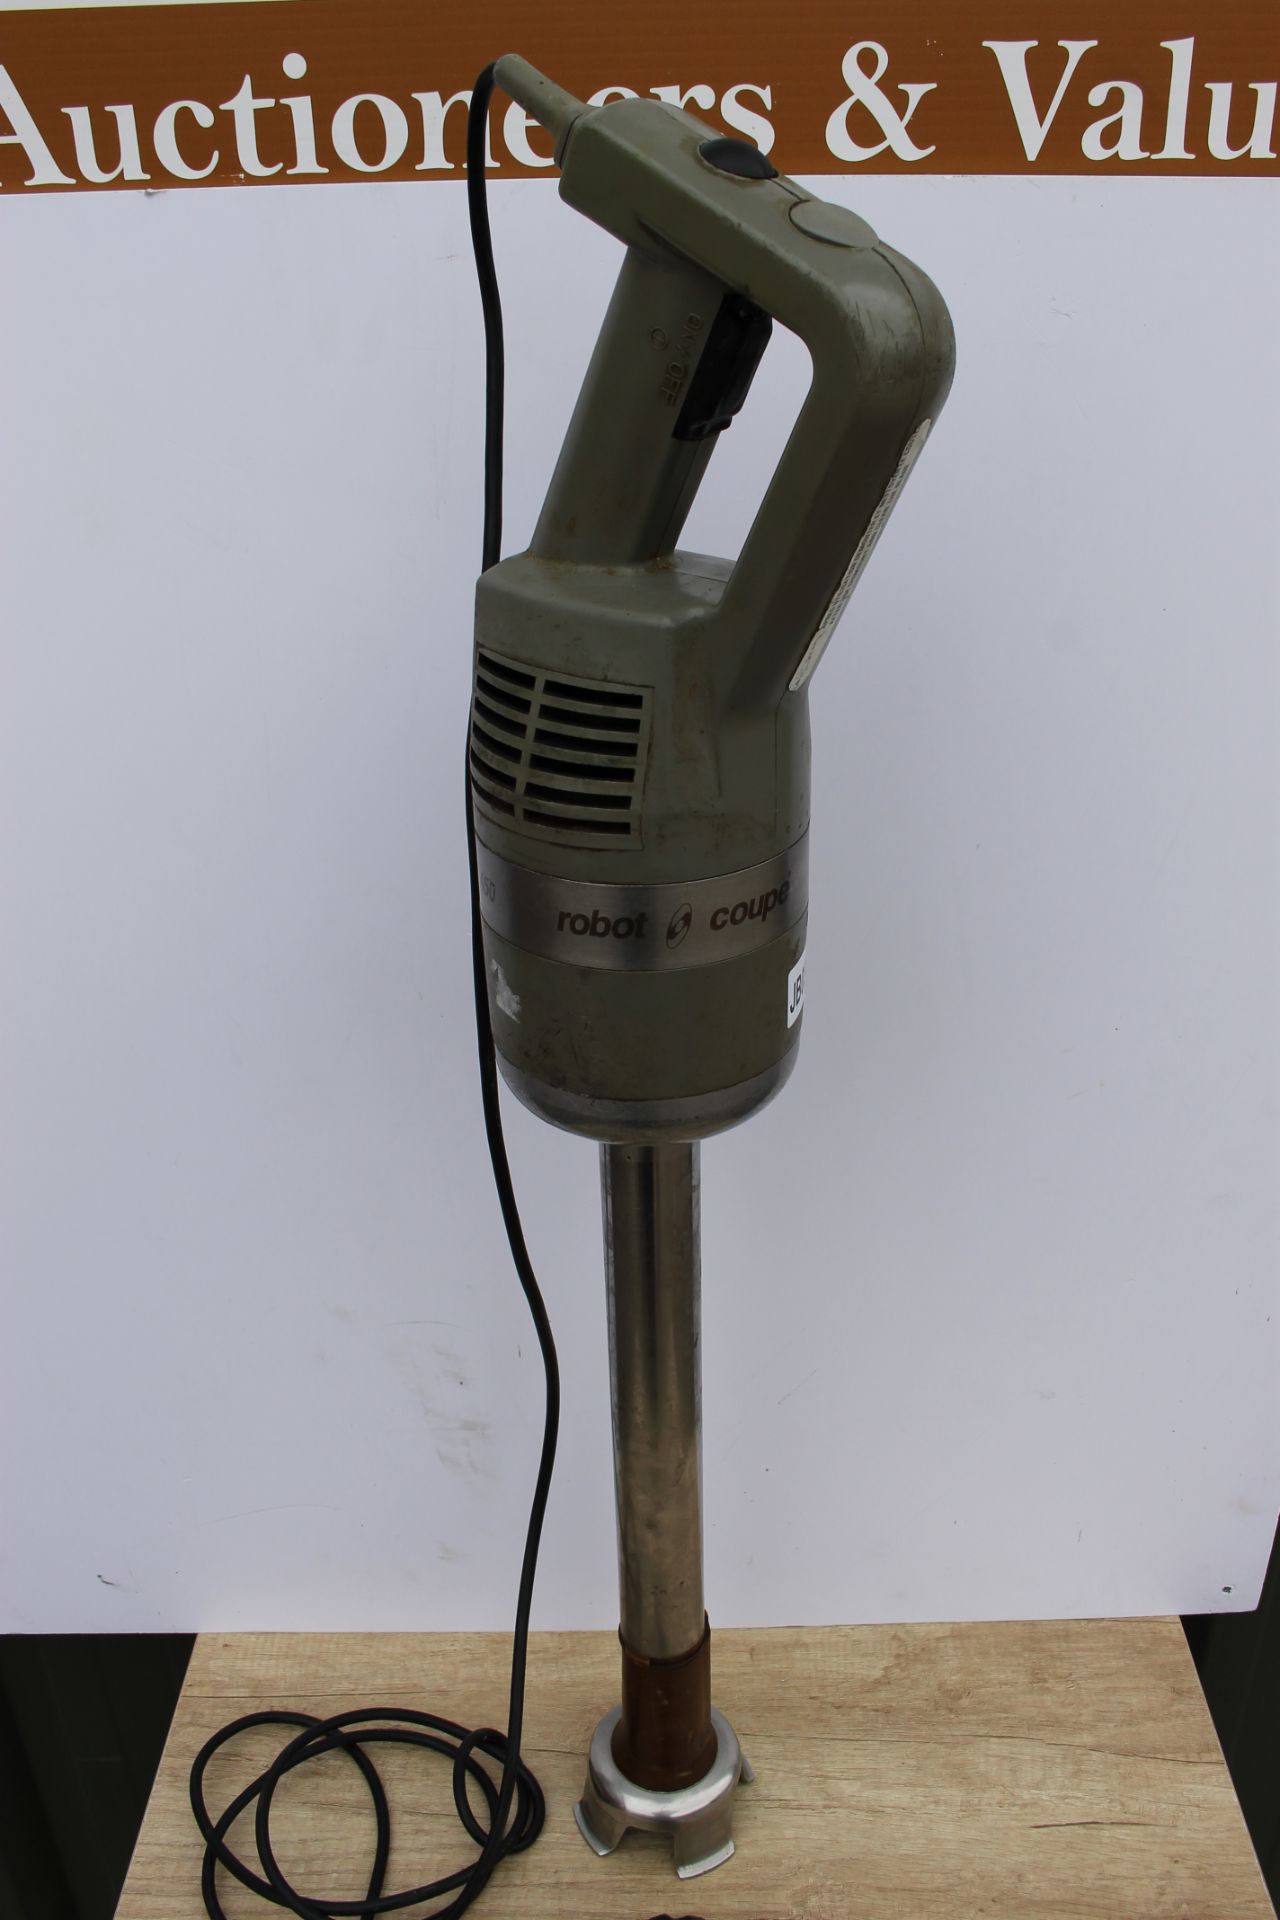 Robot Coupe MP450 Stick Blender -1ph- as found - Image 2 of 2